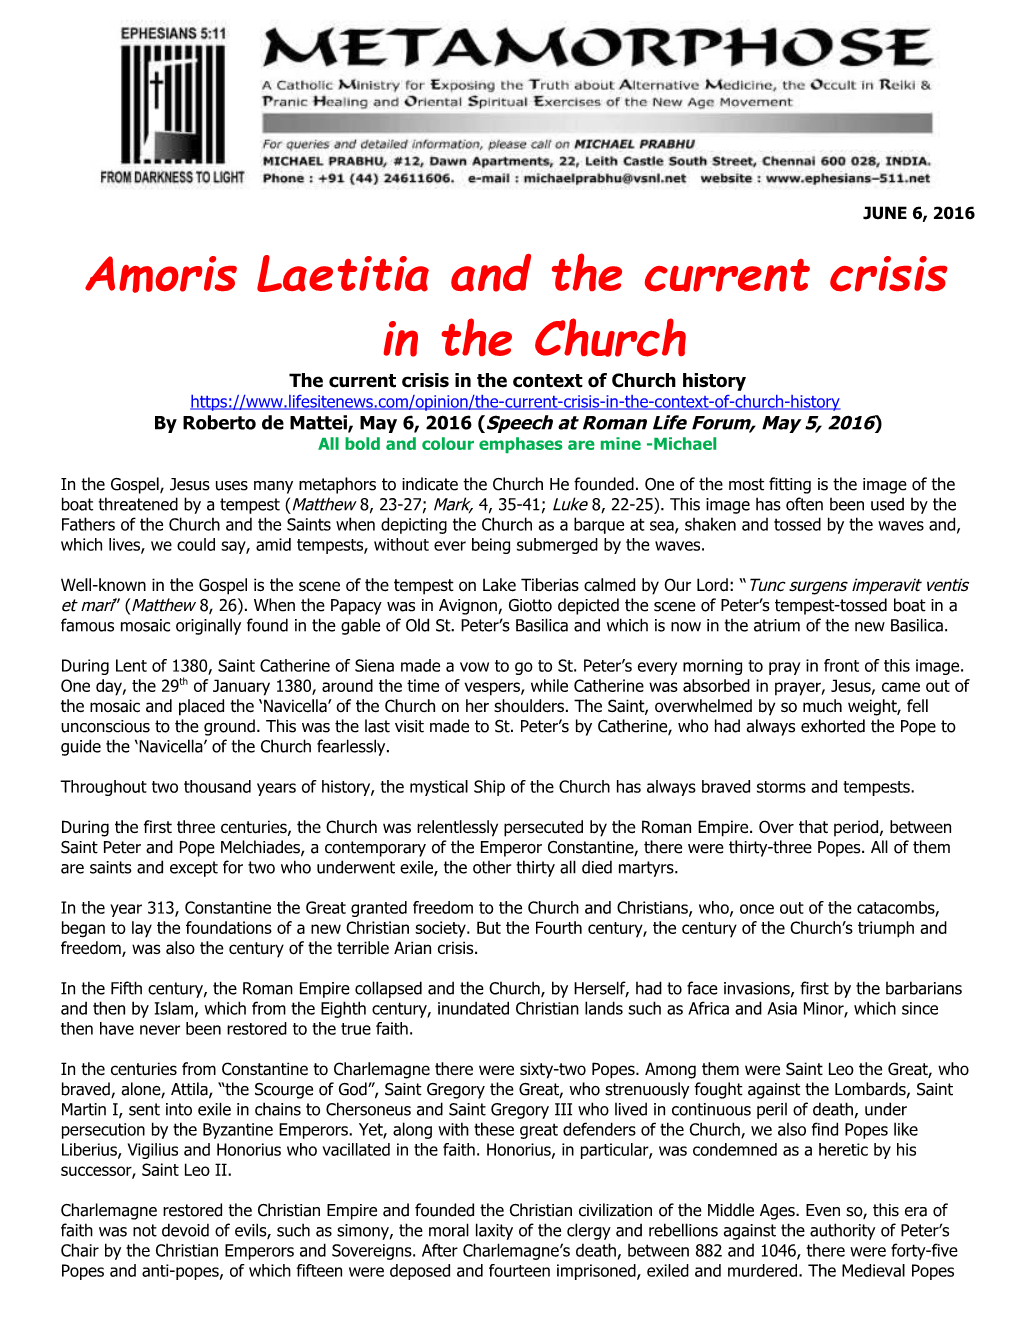 Amoris Laetitia and the Current Crisis in the Church